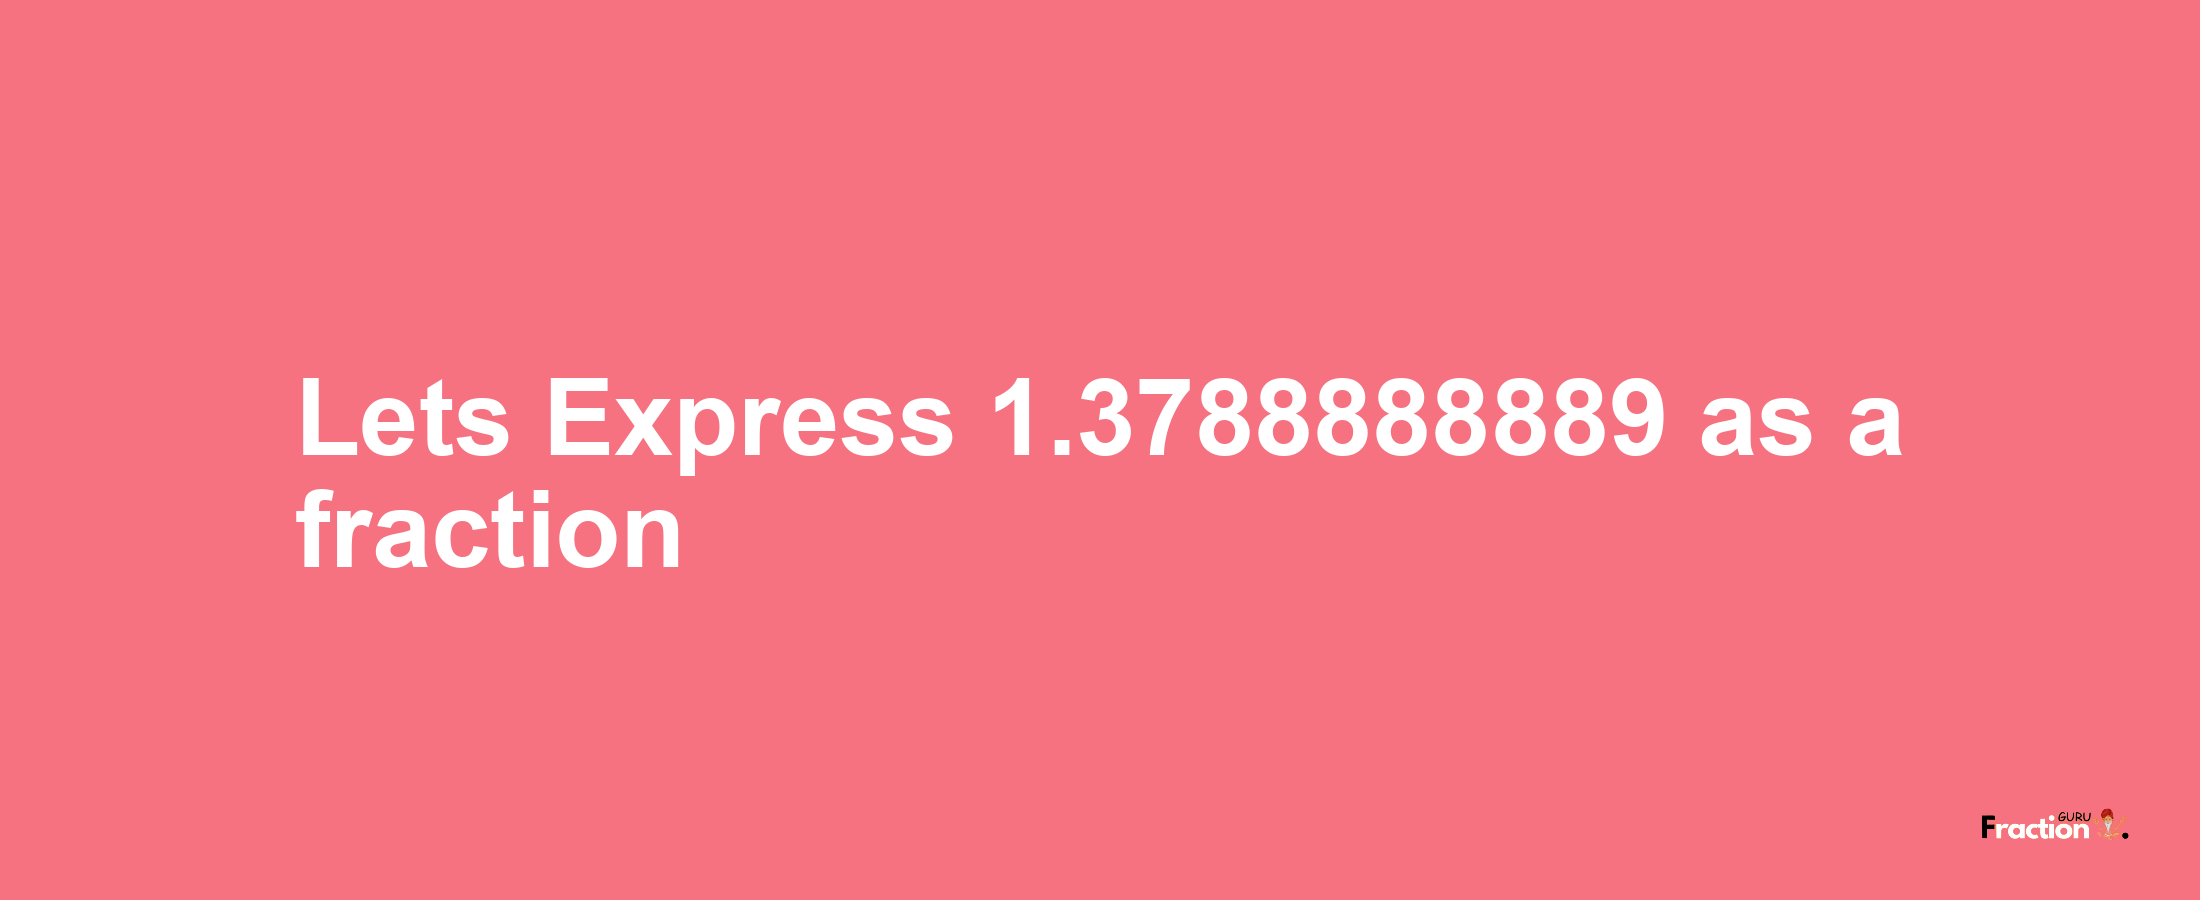 Lets Express 1.3788888889 as afraction